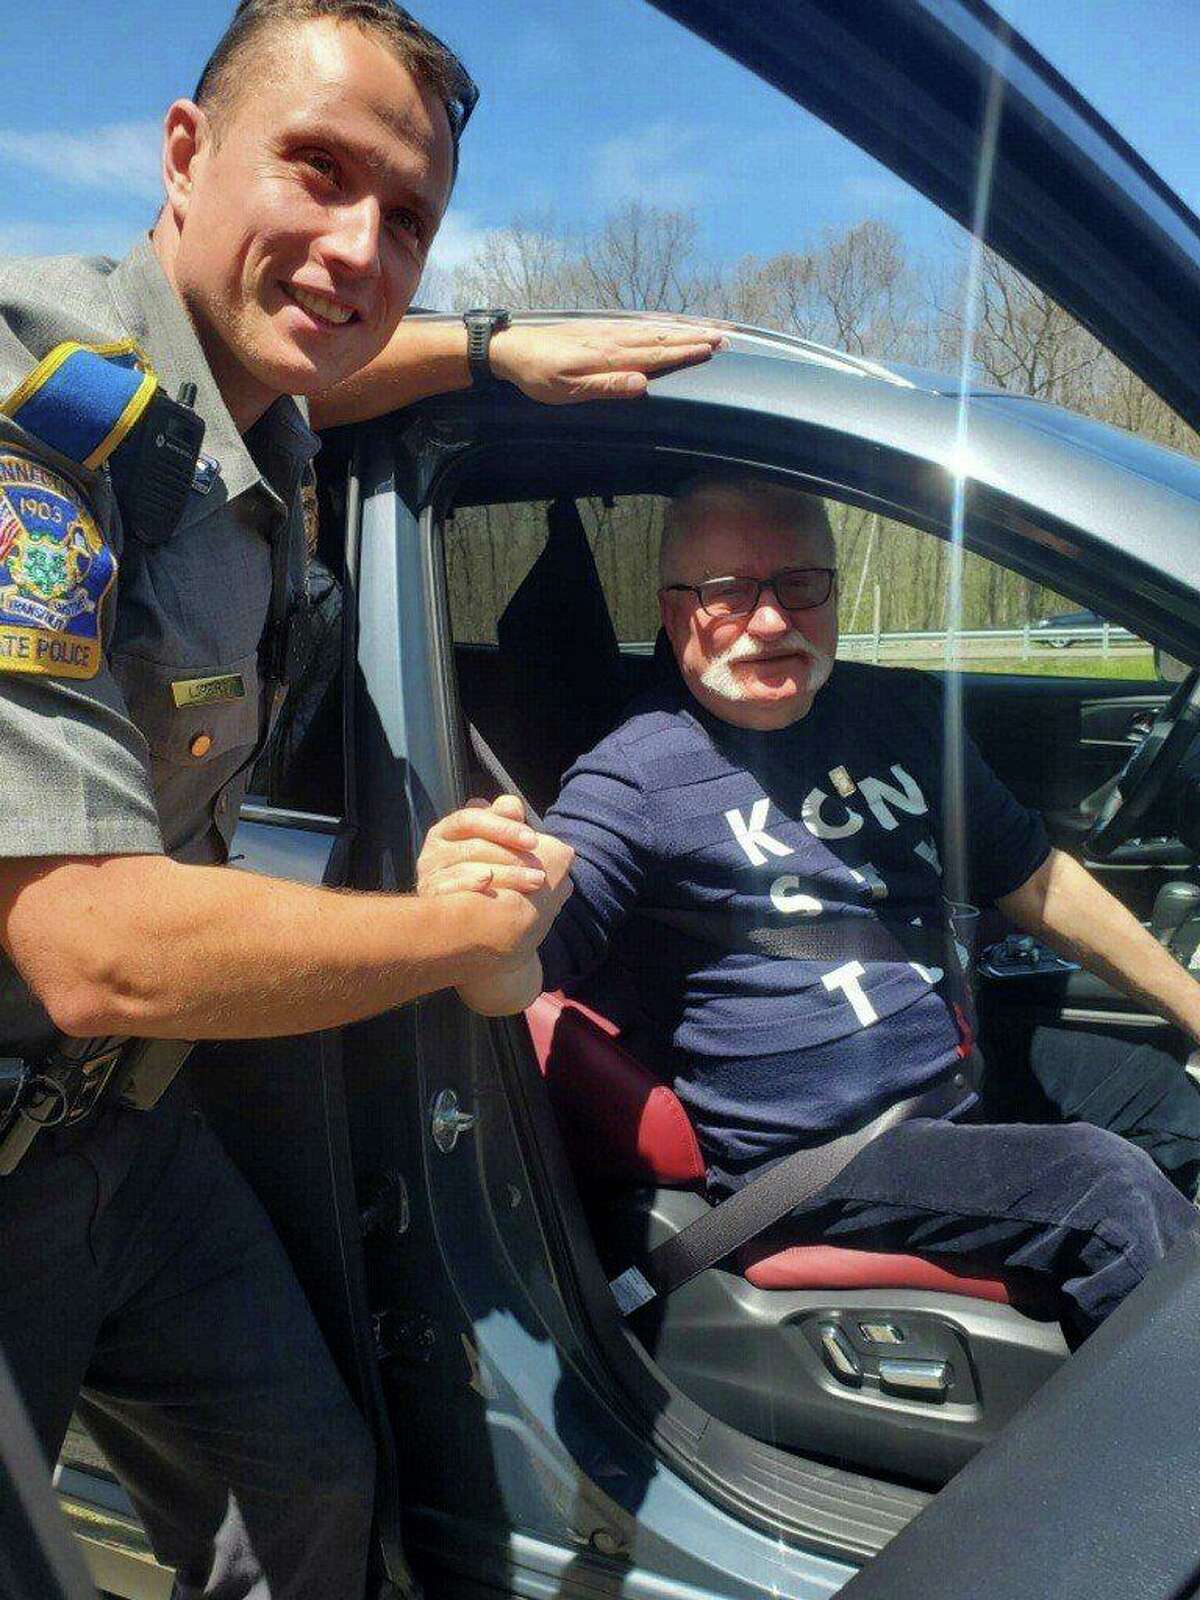 A state trooper was called to Interstate 84 in Tolland Wednesday afternoon to help Lech Walesa, the former president of Poland and a Nobel Peace Prize laureate, with a flat tire.